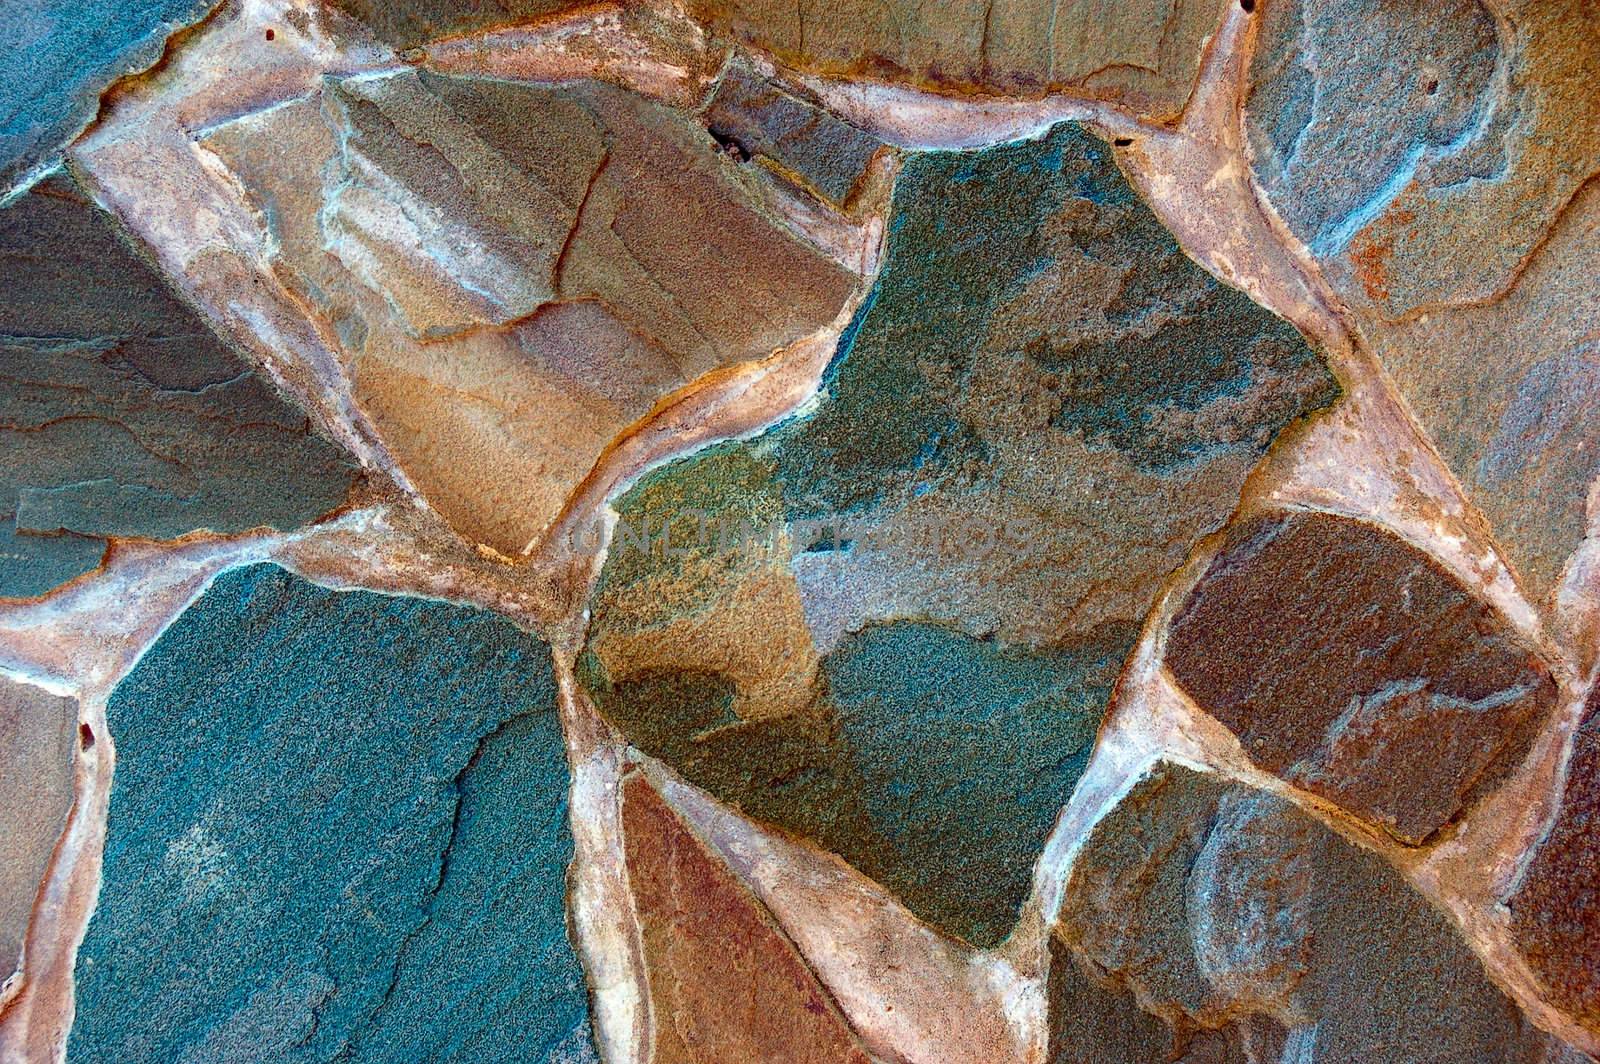 colored (prevaling blue and brown) rough wall surface made of wild stones